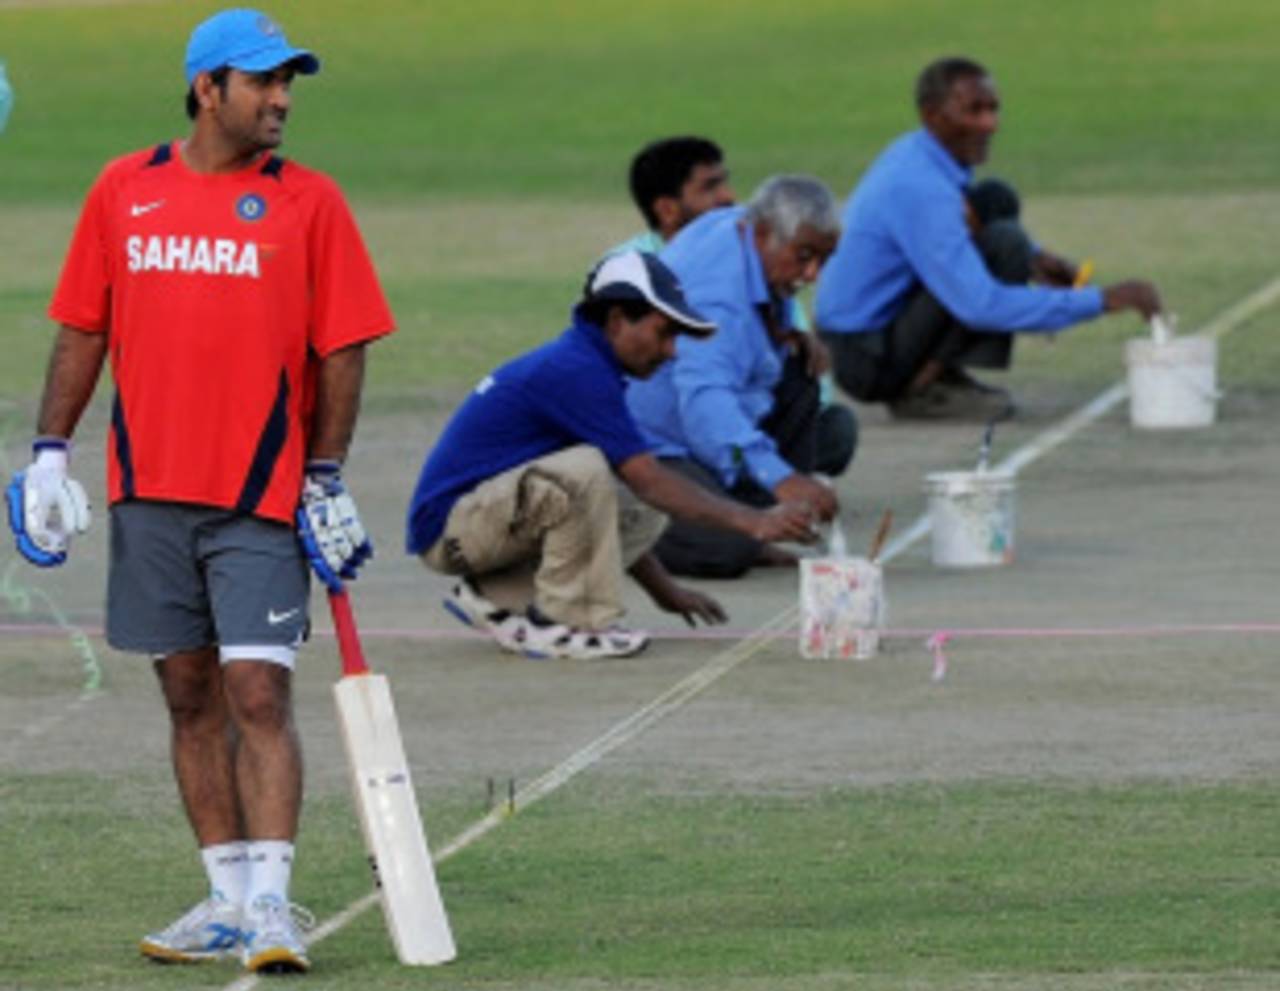 MS Dhoni bats during practice as the groundstaff prepares the pitch, Delhi, March 8, 2011